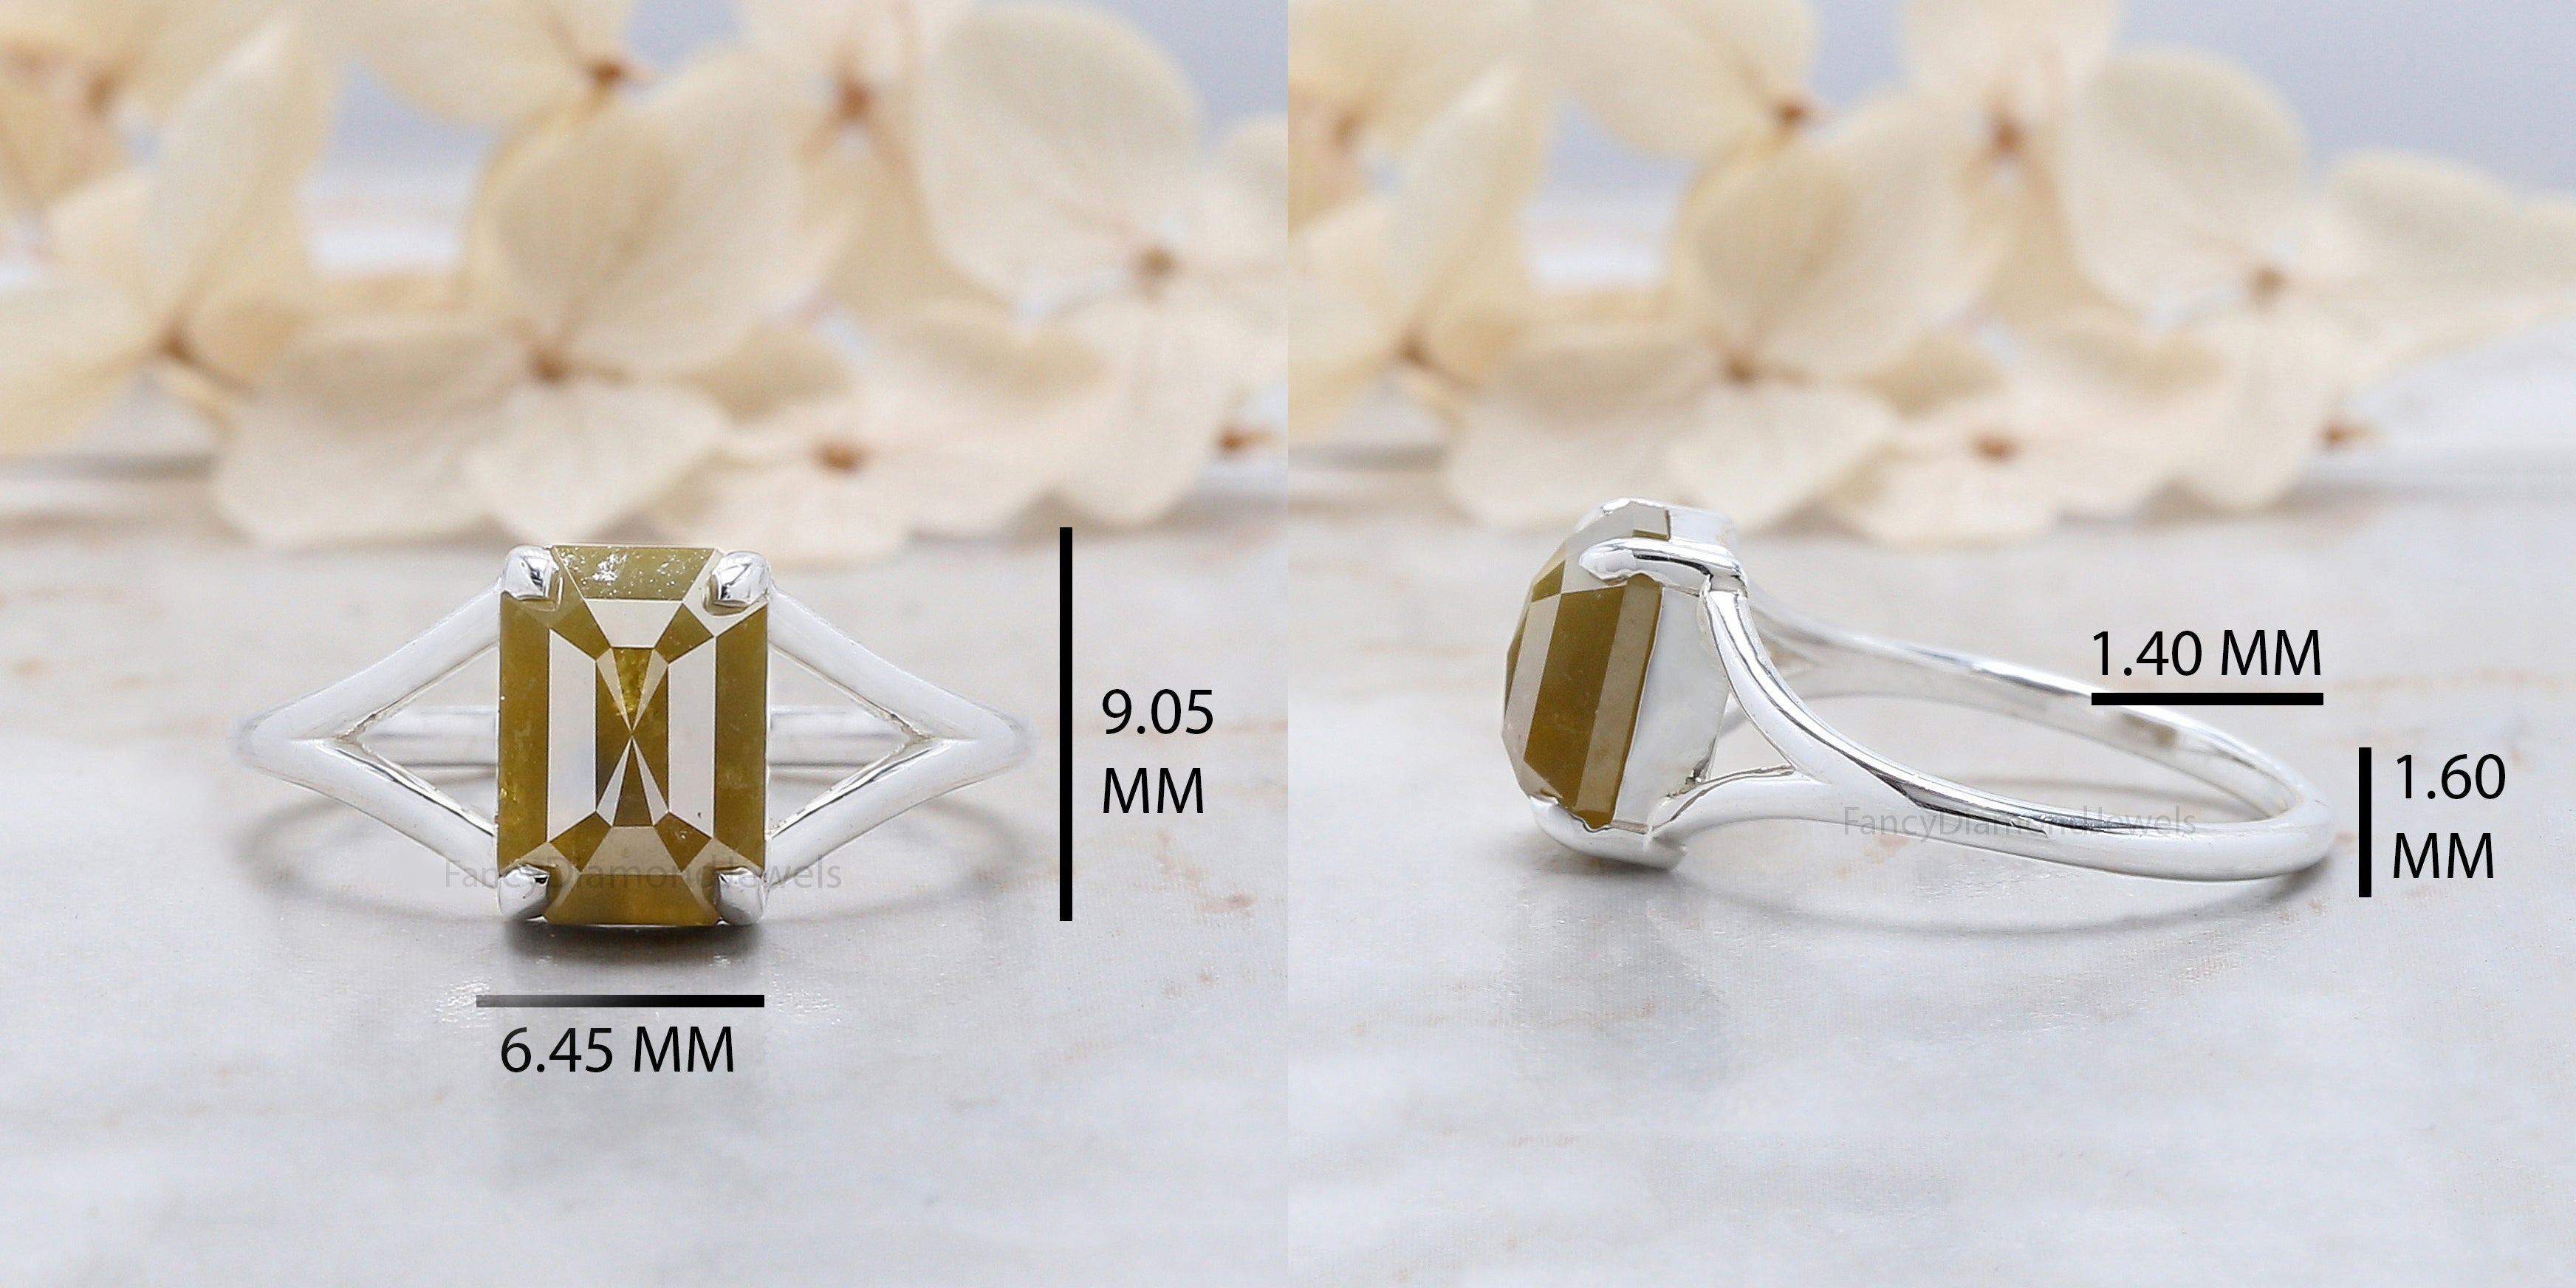 2.77 Ct Natural Emerald Cut Yellow Color Diamond Ring 8.90 MM Emerald Shape Diamond Ring 14K Solid Rose Gold Silver Engagement Ring QN153